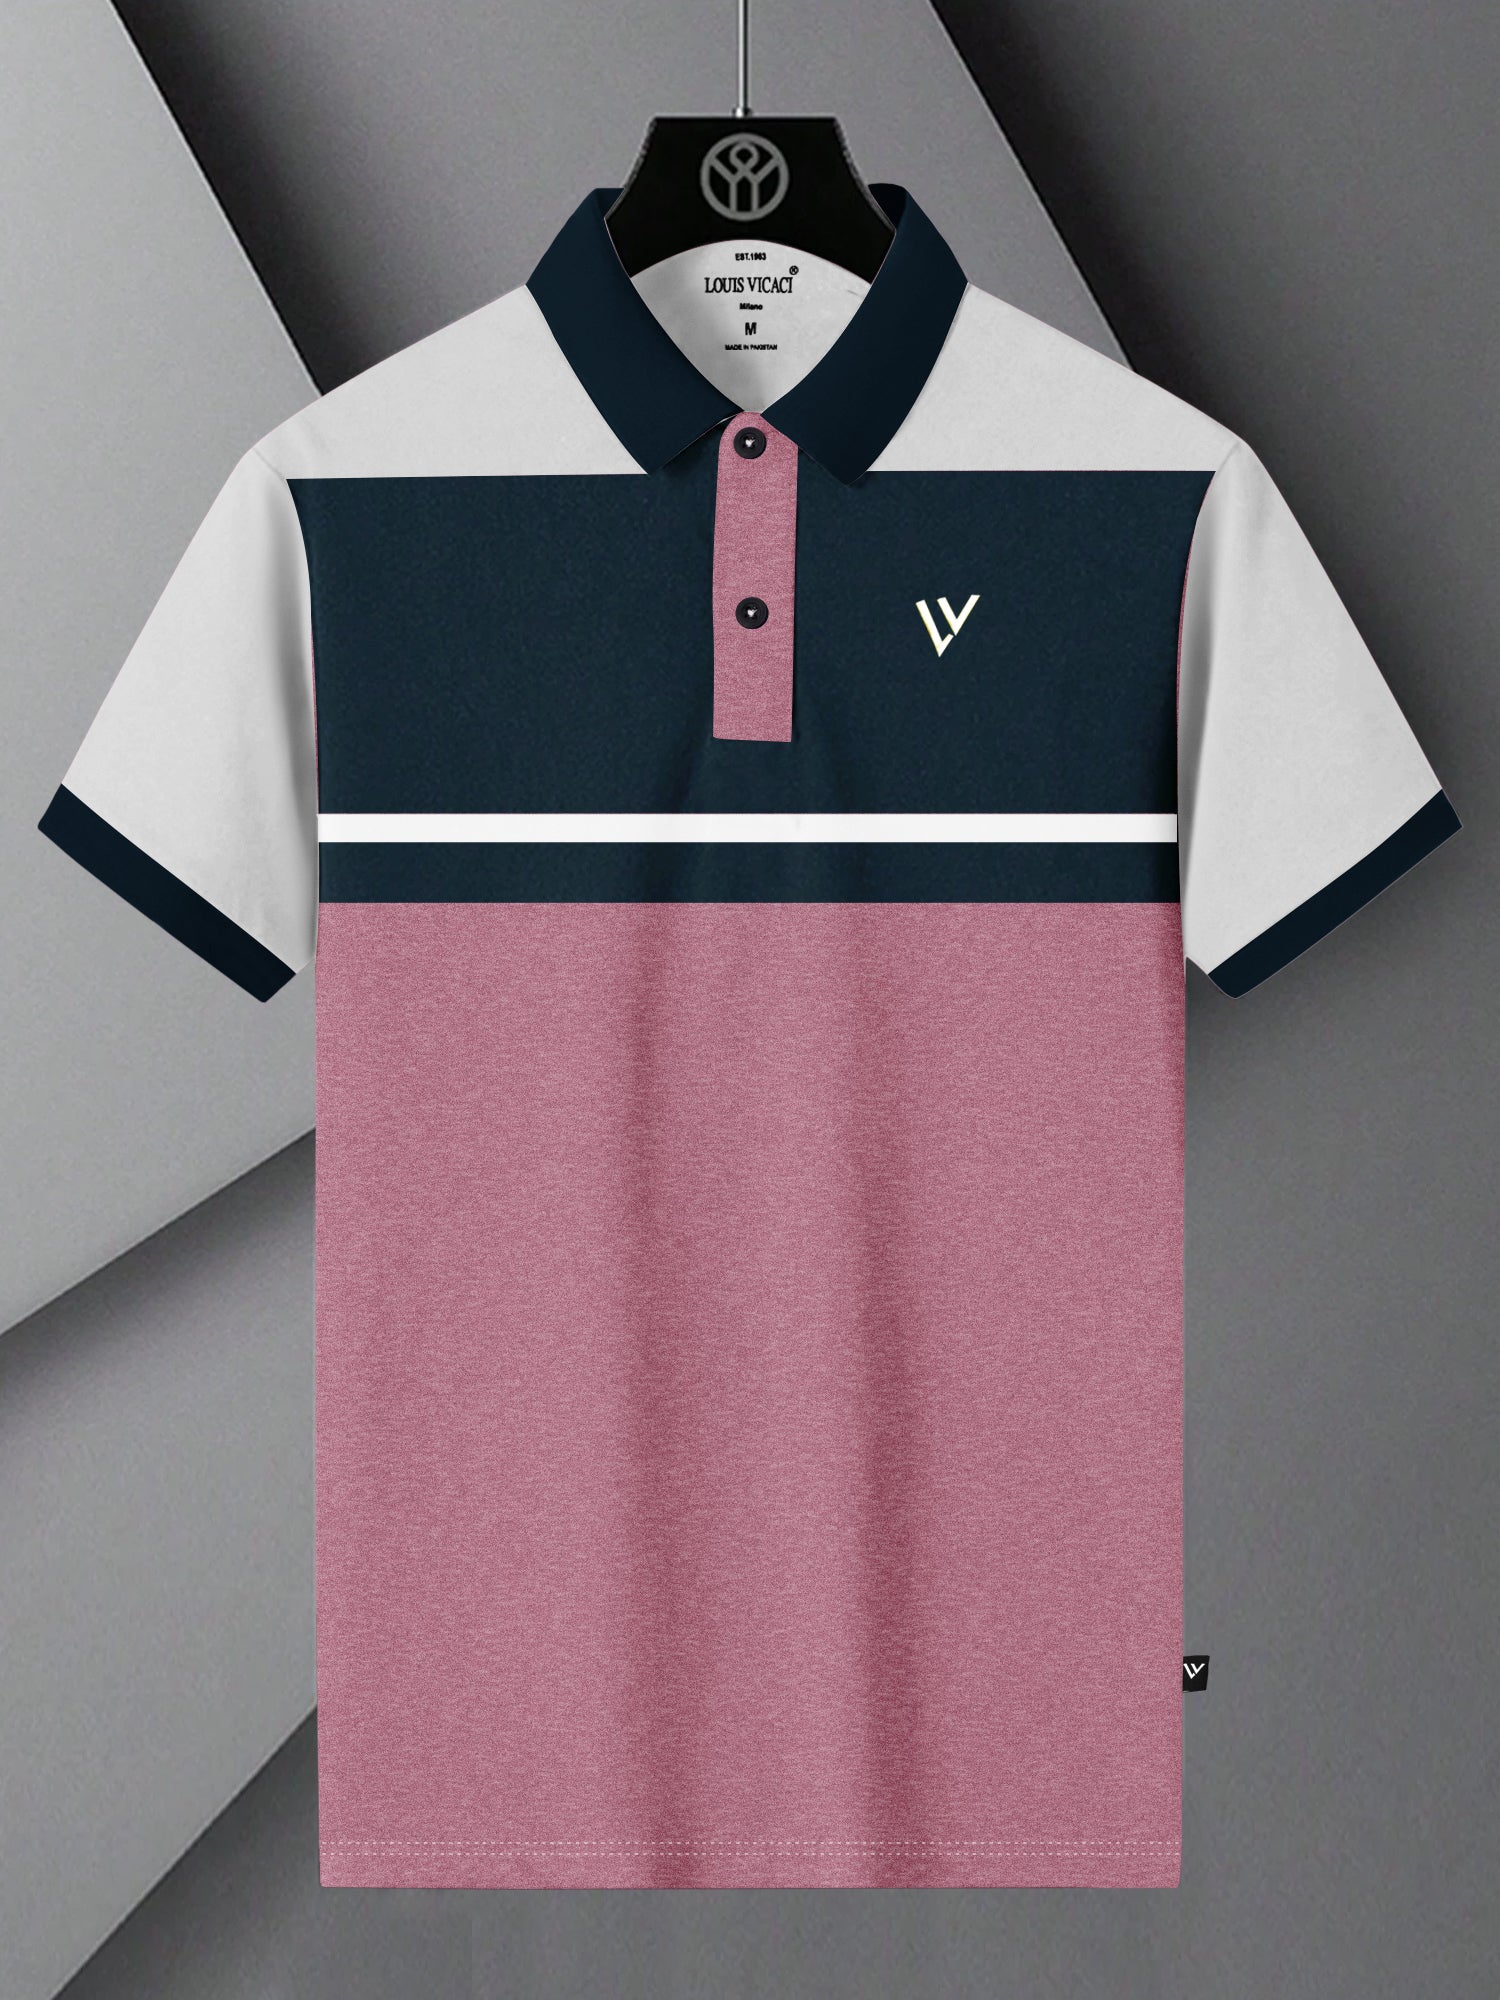 LV Summer Polo Shirt For Men-Dark Pink with Navy & White-SP1579